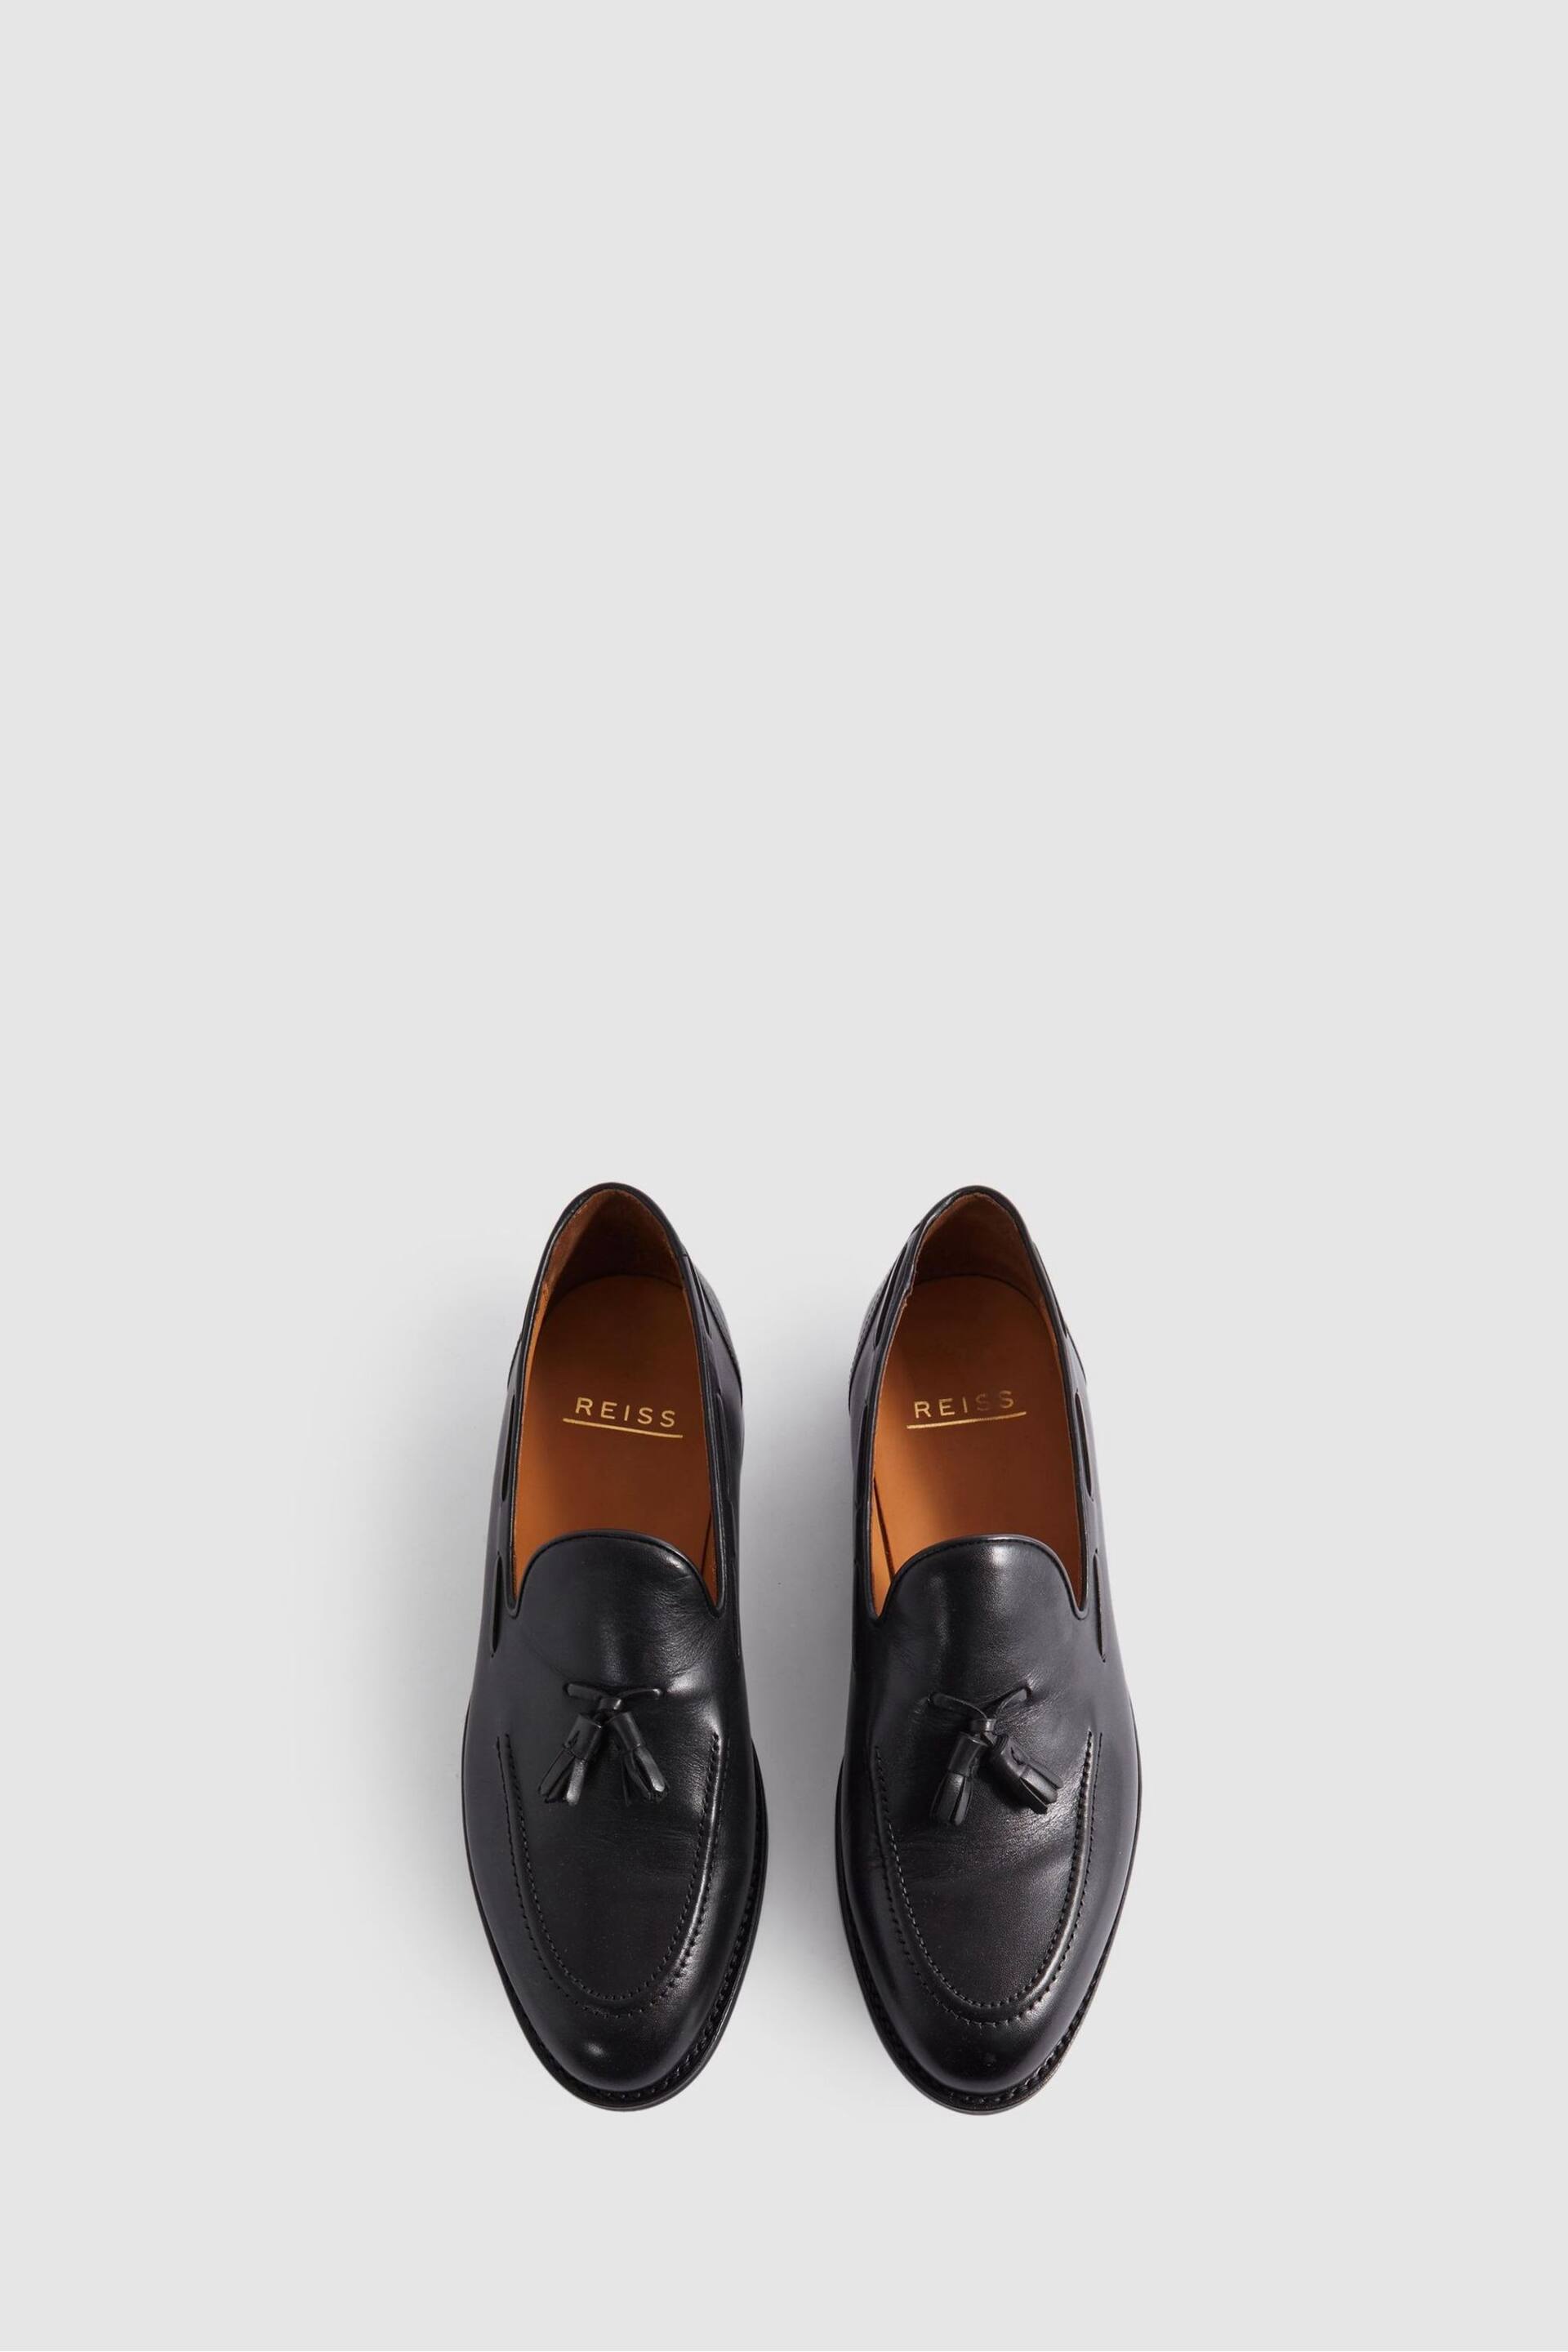 Reiss Black Clayton Leather Tassel Loafers - Image 3 of 4